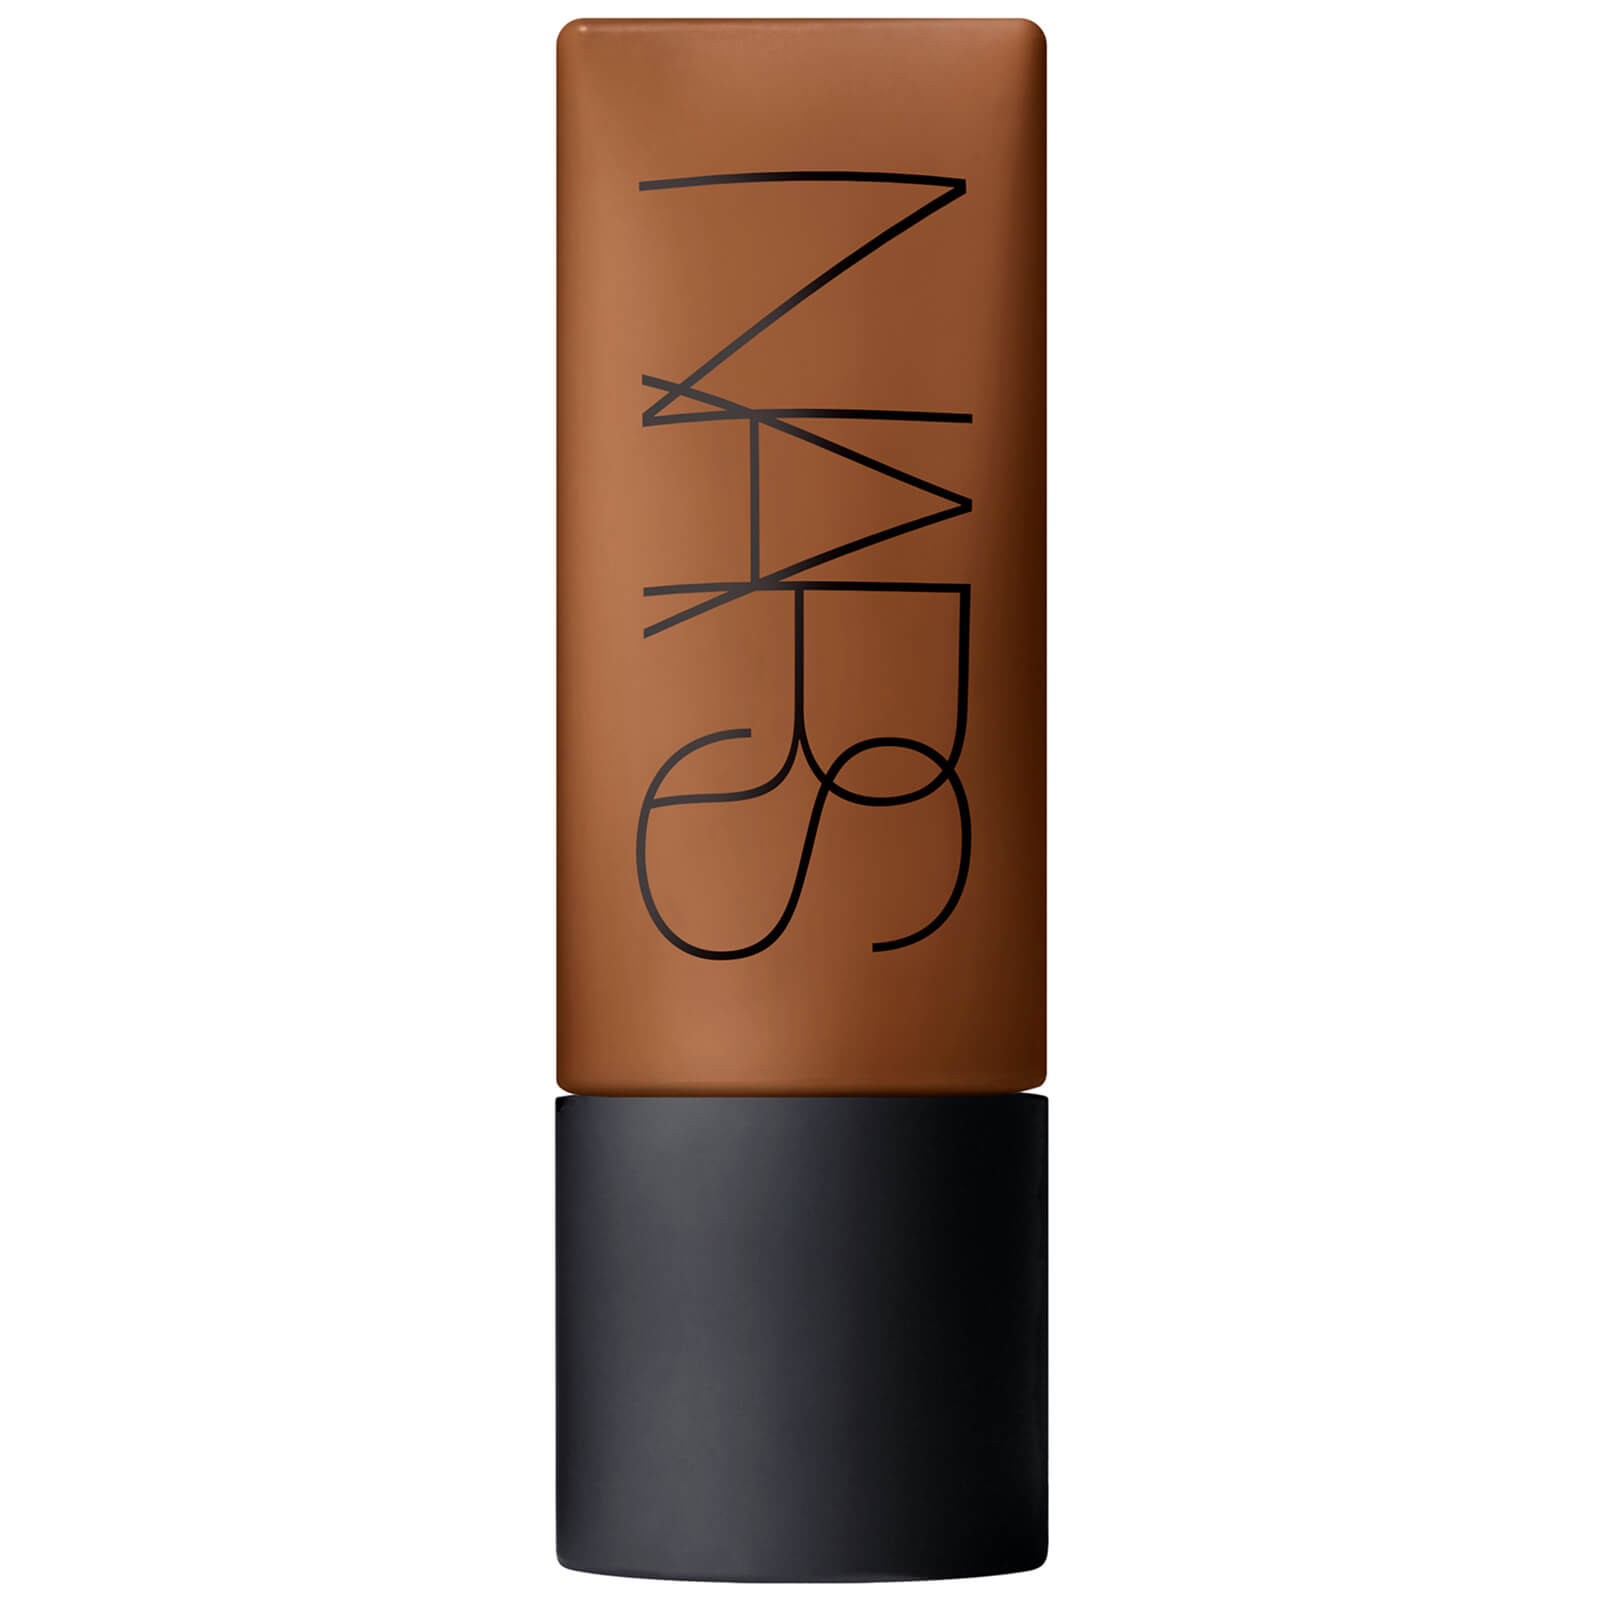 NARS Soft Matte Complete Foundation 45ml (Various Shades) - Macao